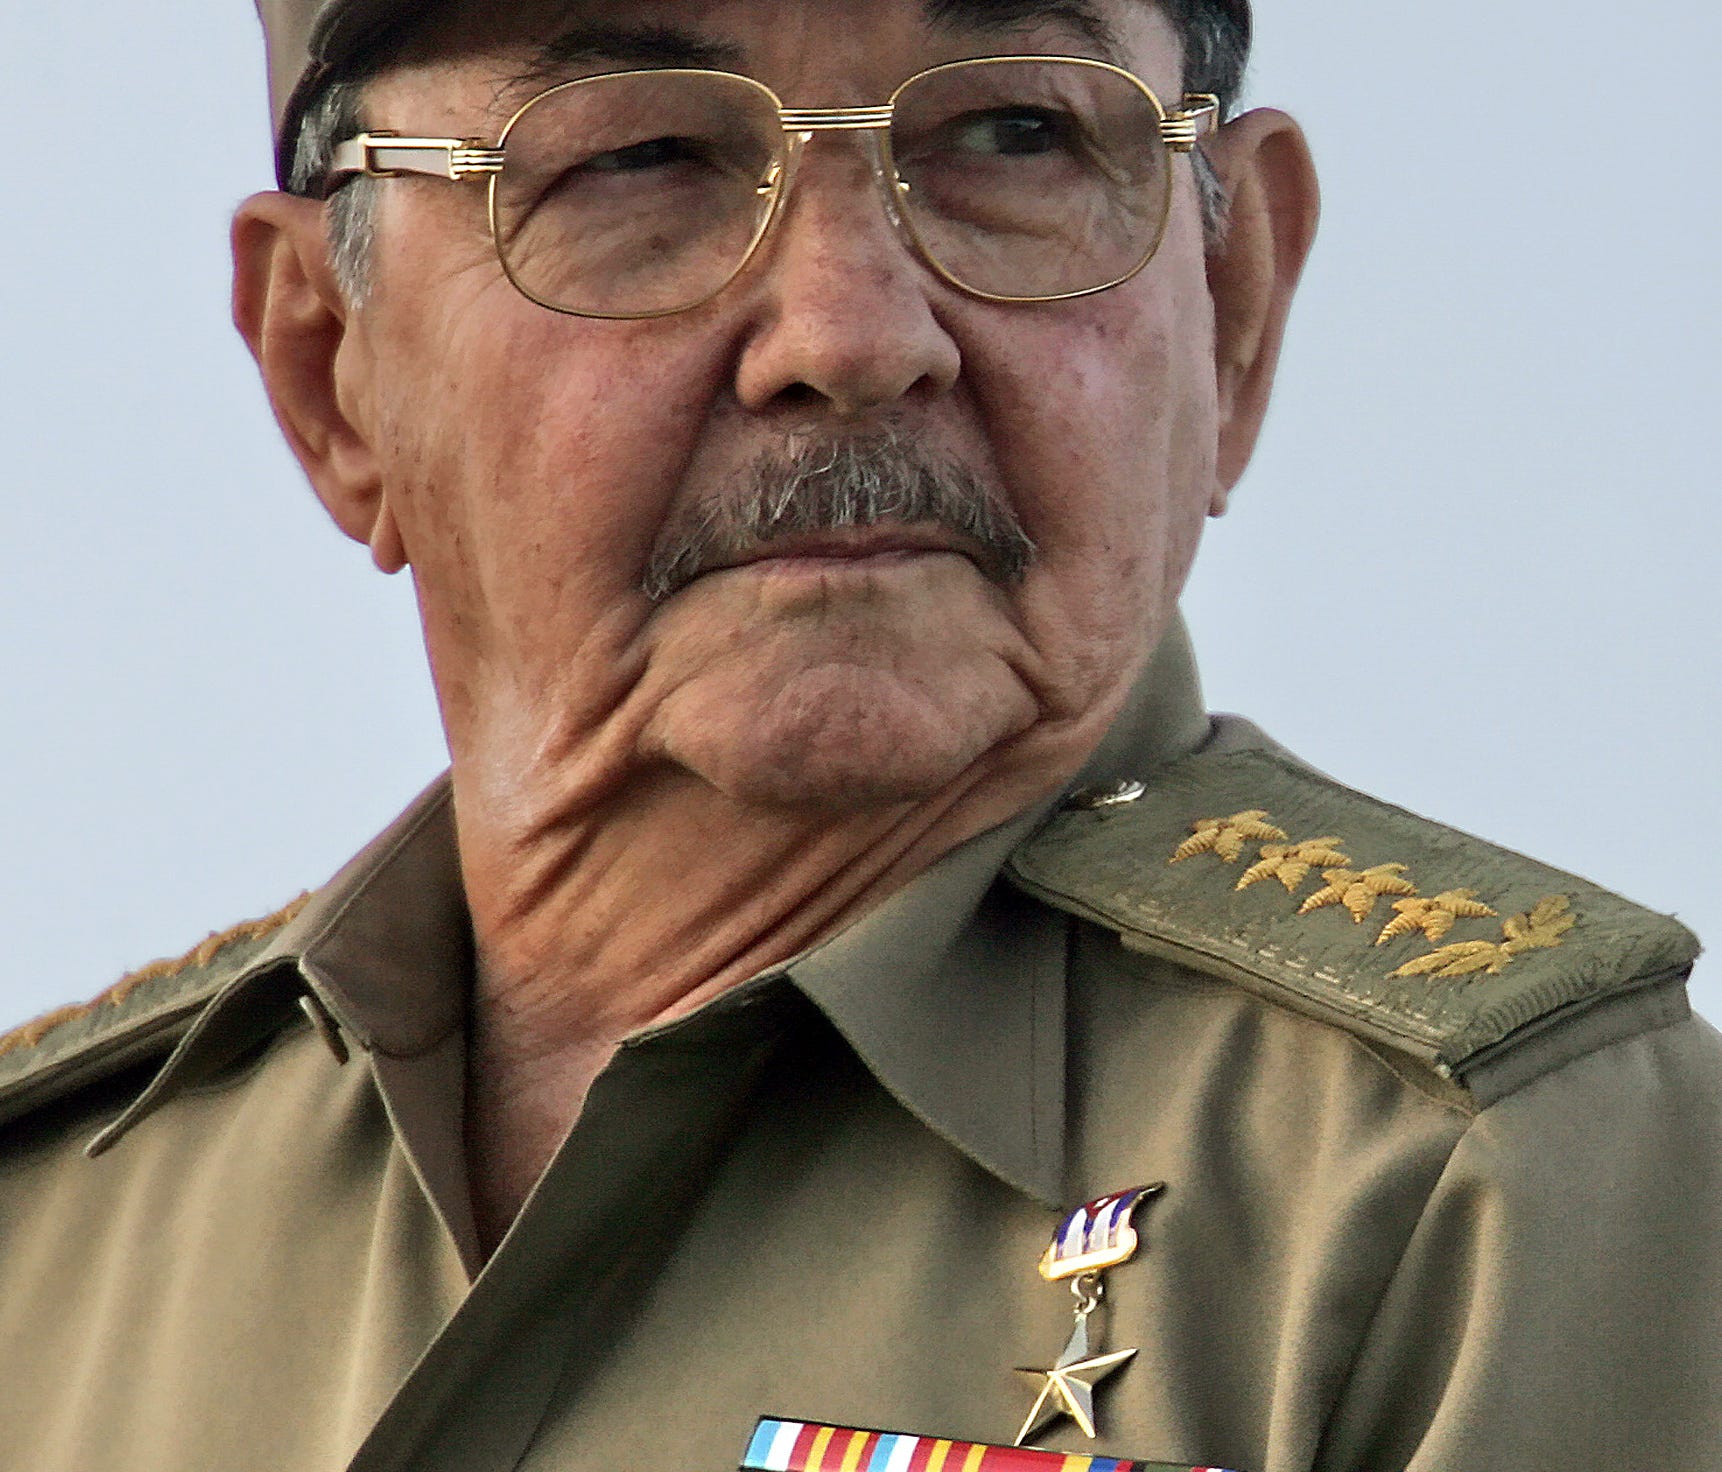 Acting Cuban President Raul Castro participates in a military parade on Dec. 2, 2006, at Revolution Square to celebrate the 80th birthday of his brother, President Fidel Castro, and the 50th Anniversary of the Cuban Army.